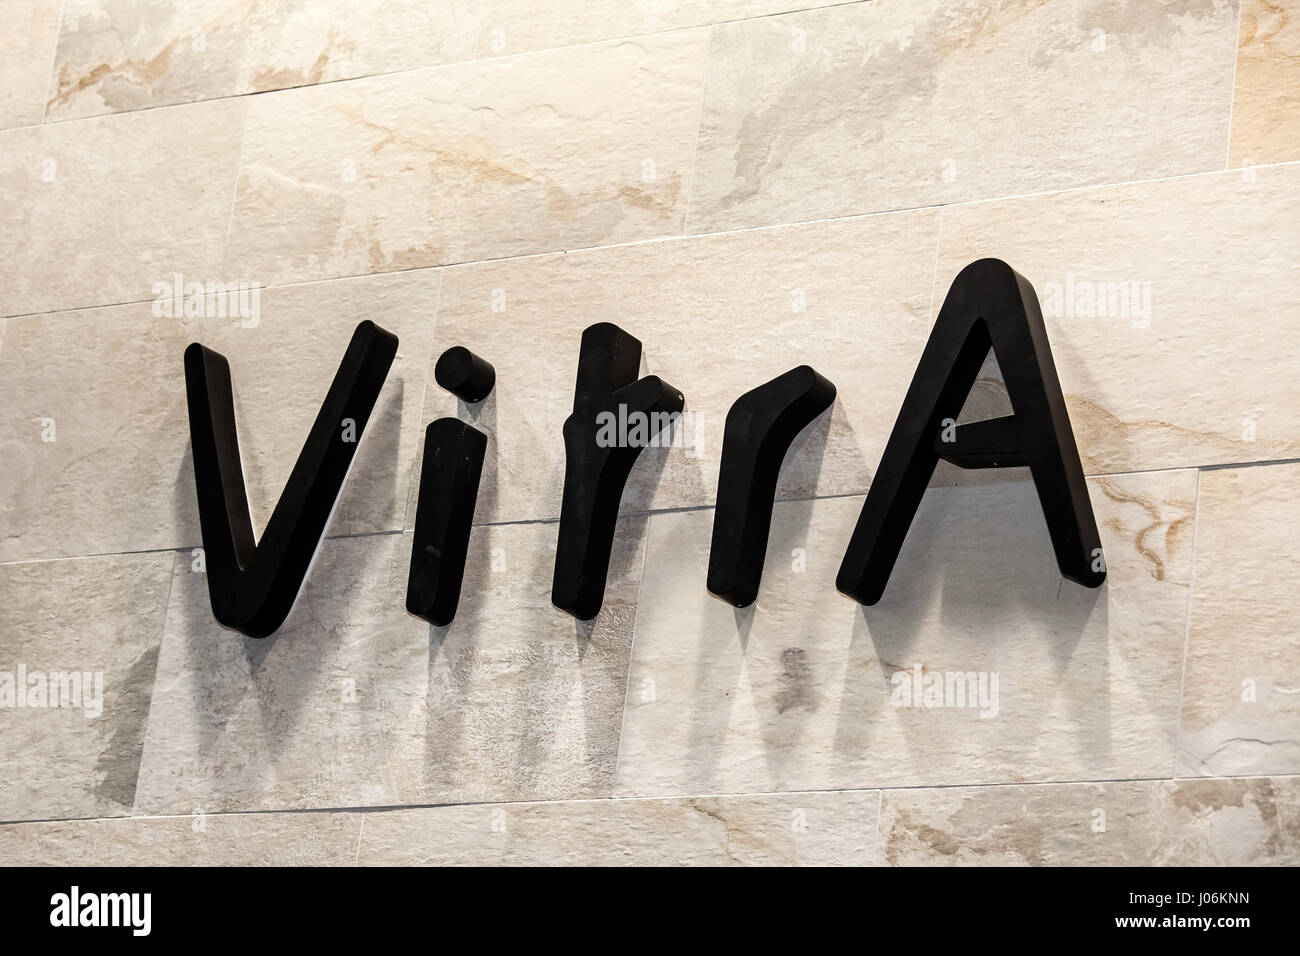 Logo sign of Vitra company. VitrA is a Turkish manufacturer of sanitaryware, bathroom furniture, brassware and ceramic tiles Stock Photo